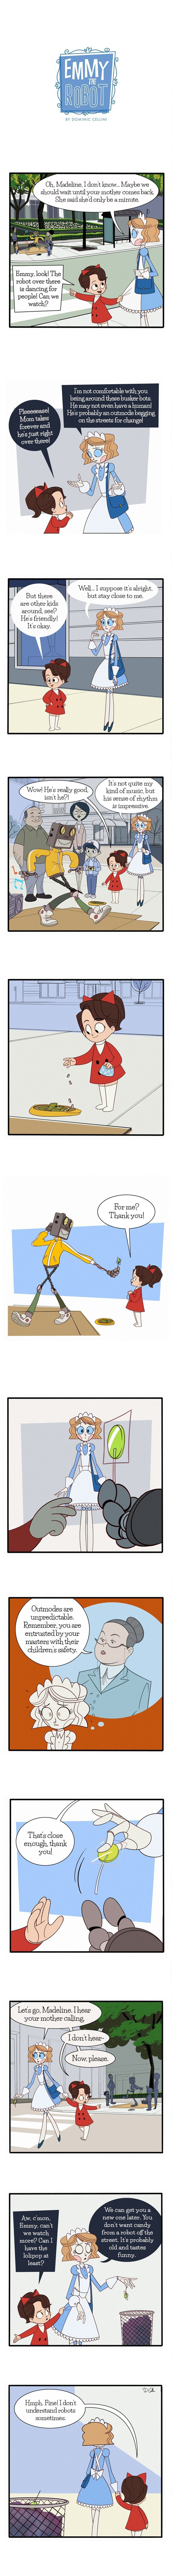 [Dominic Cellini] Emmy the Robot (ongoing) 32